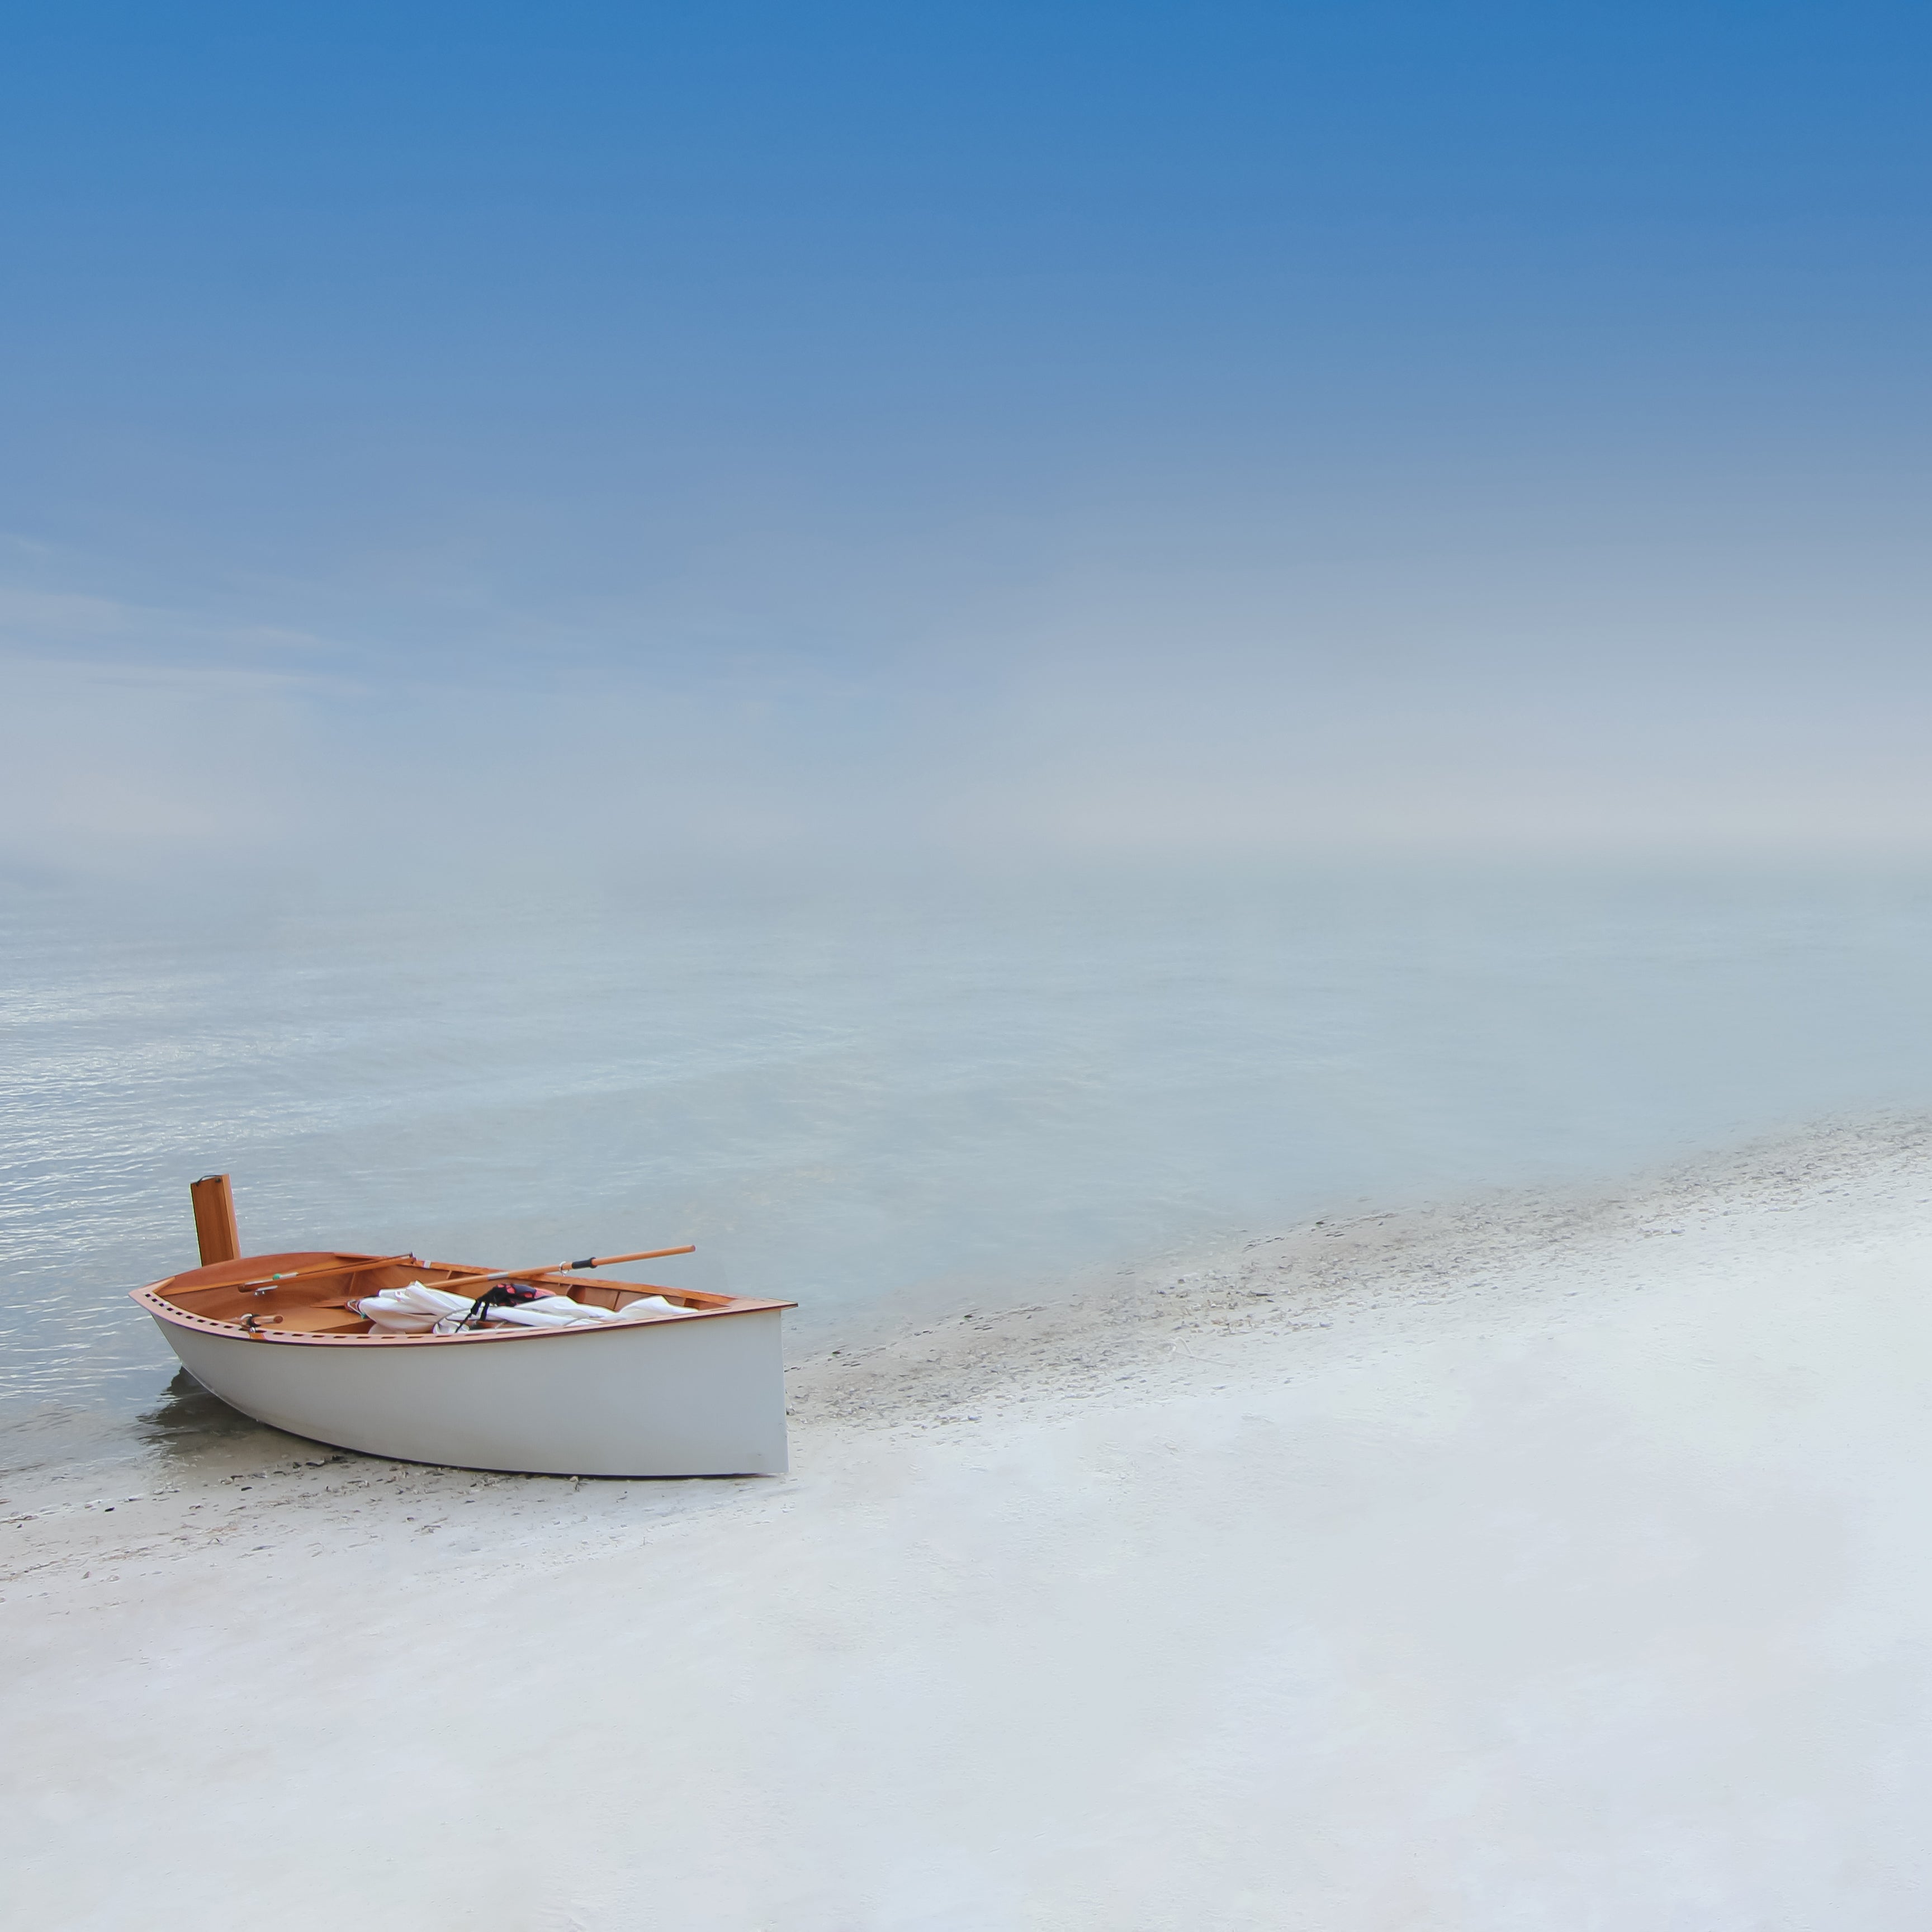 "Castaway" photograph of a lone wooden boat partially on blue ocean, partially on the sand of the beach